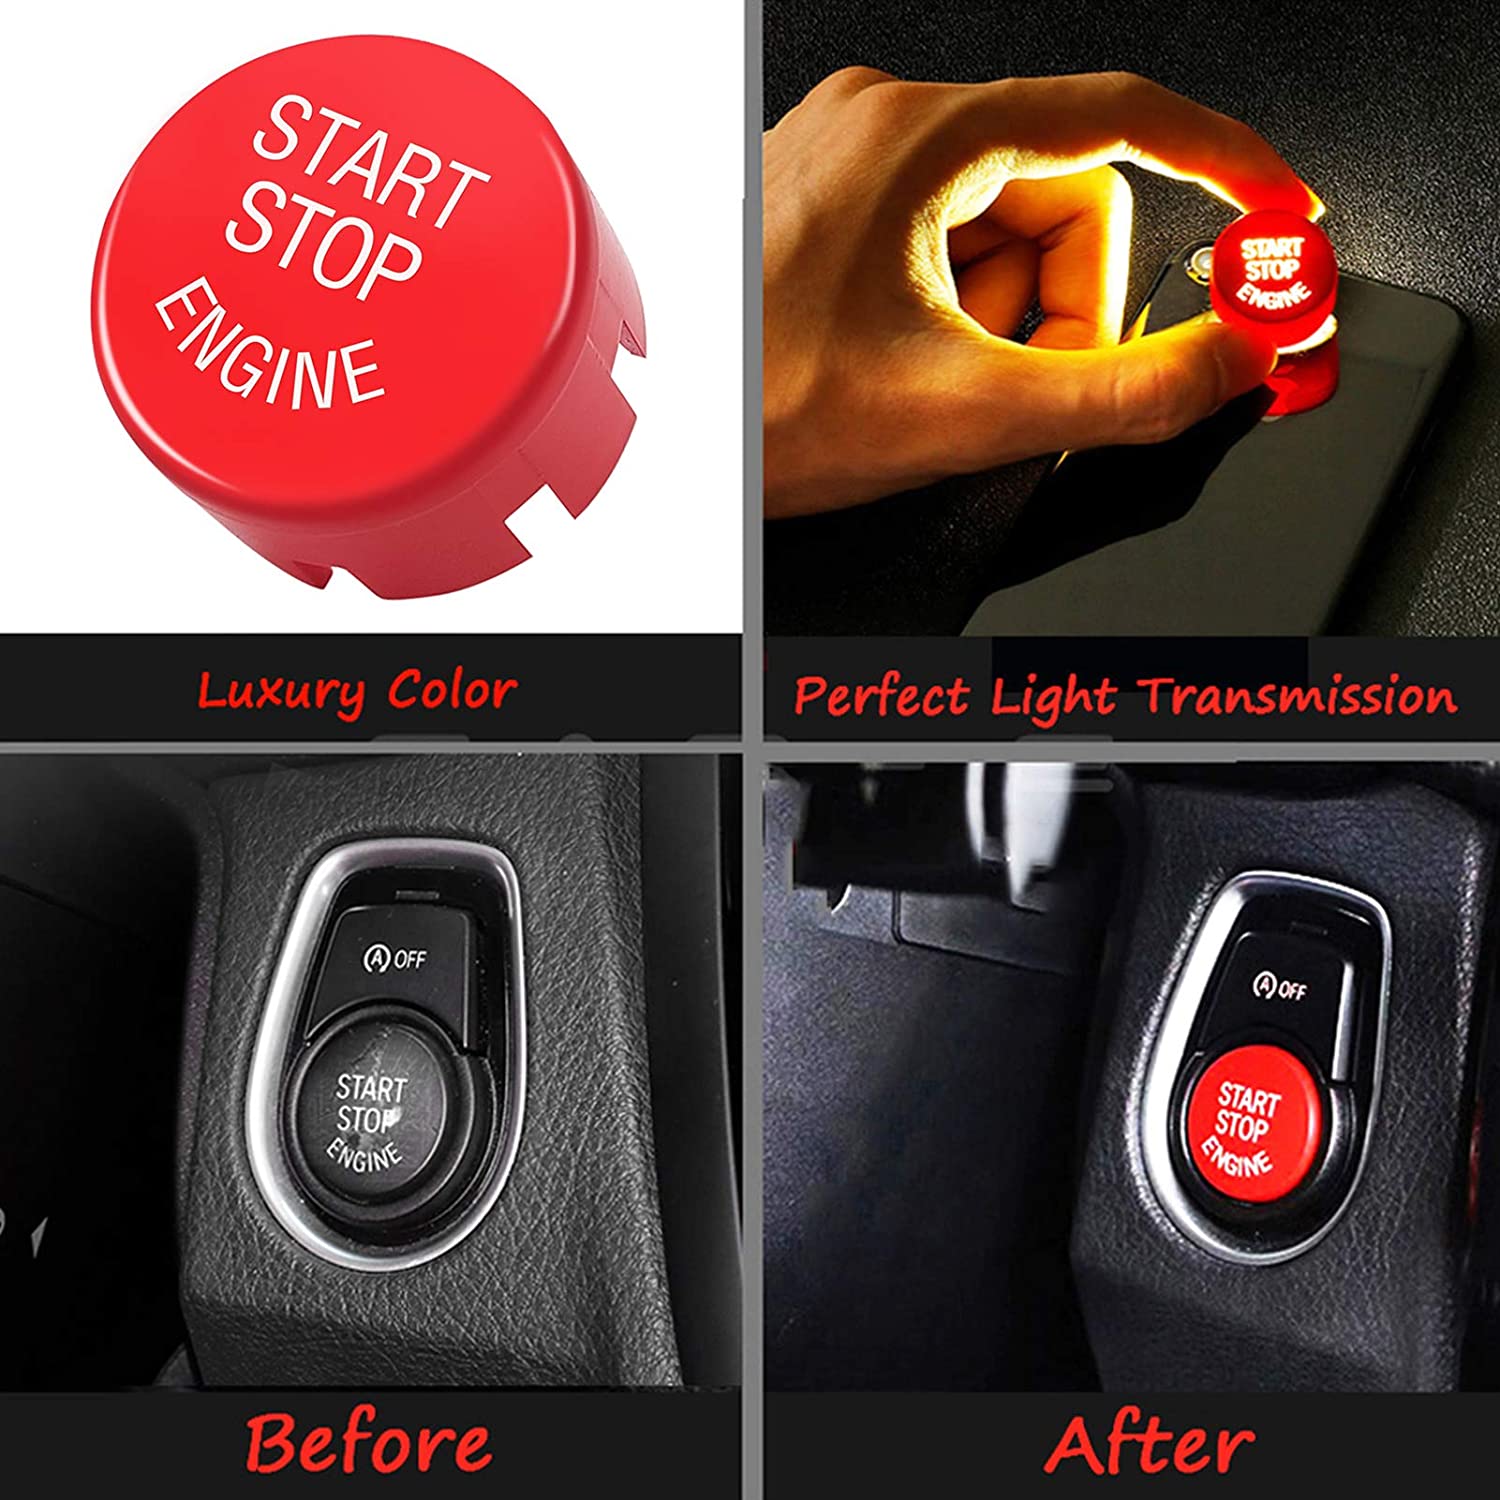 Sports Red Start Stop Engine Switch Button For BMW,Jaronx Engine Power  Ignition Start Stop Button